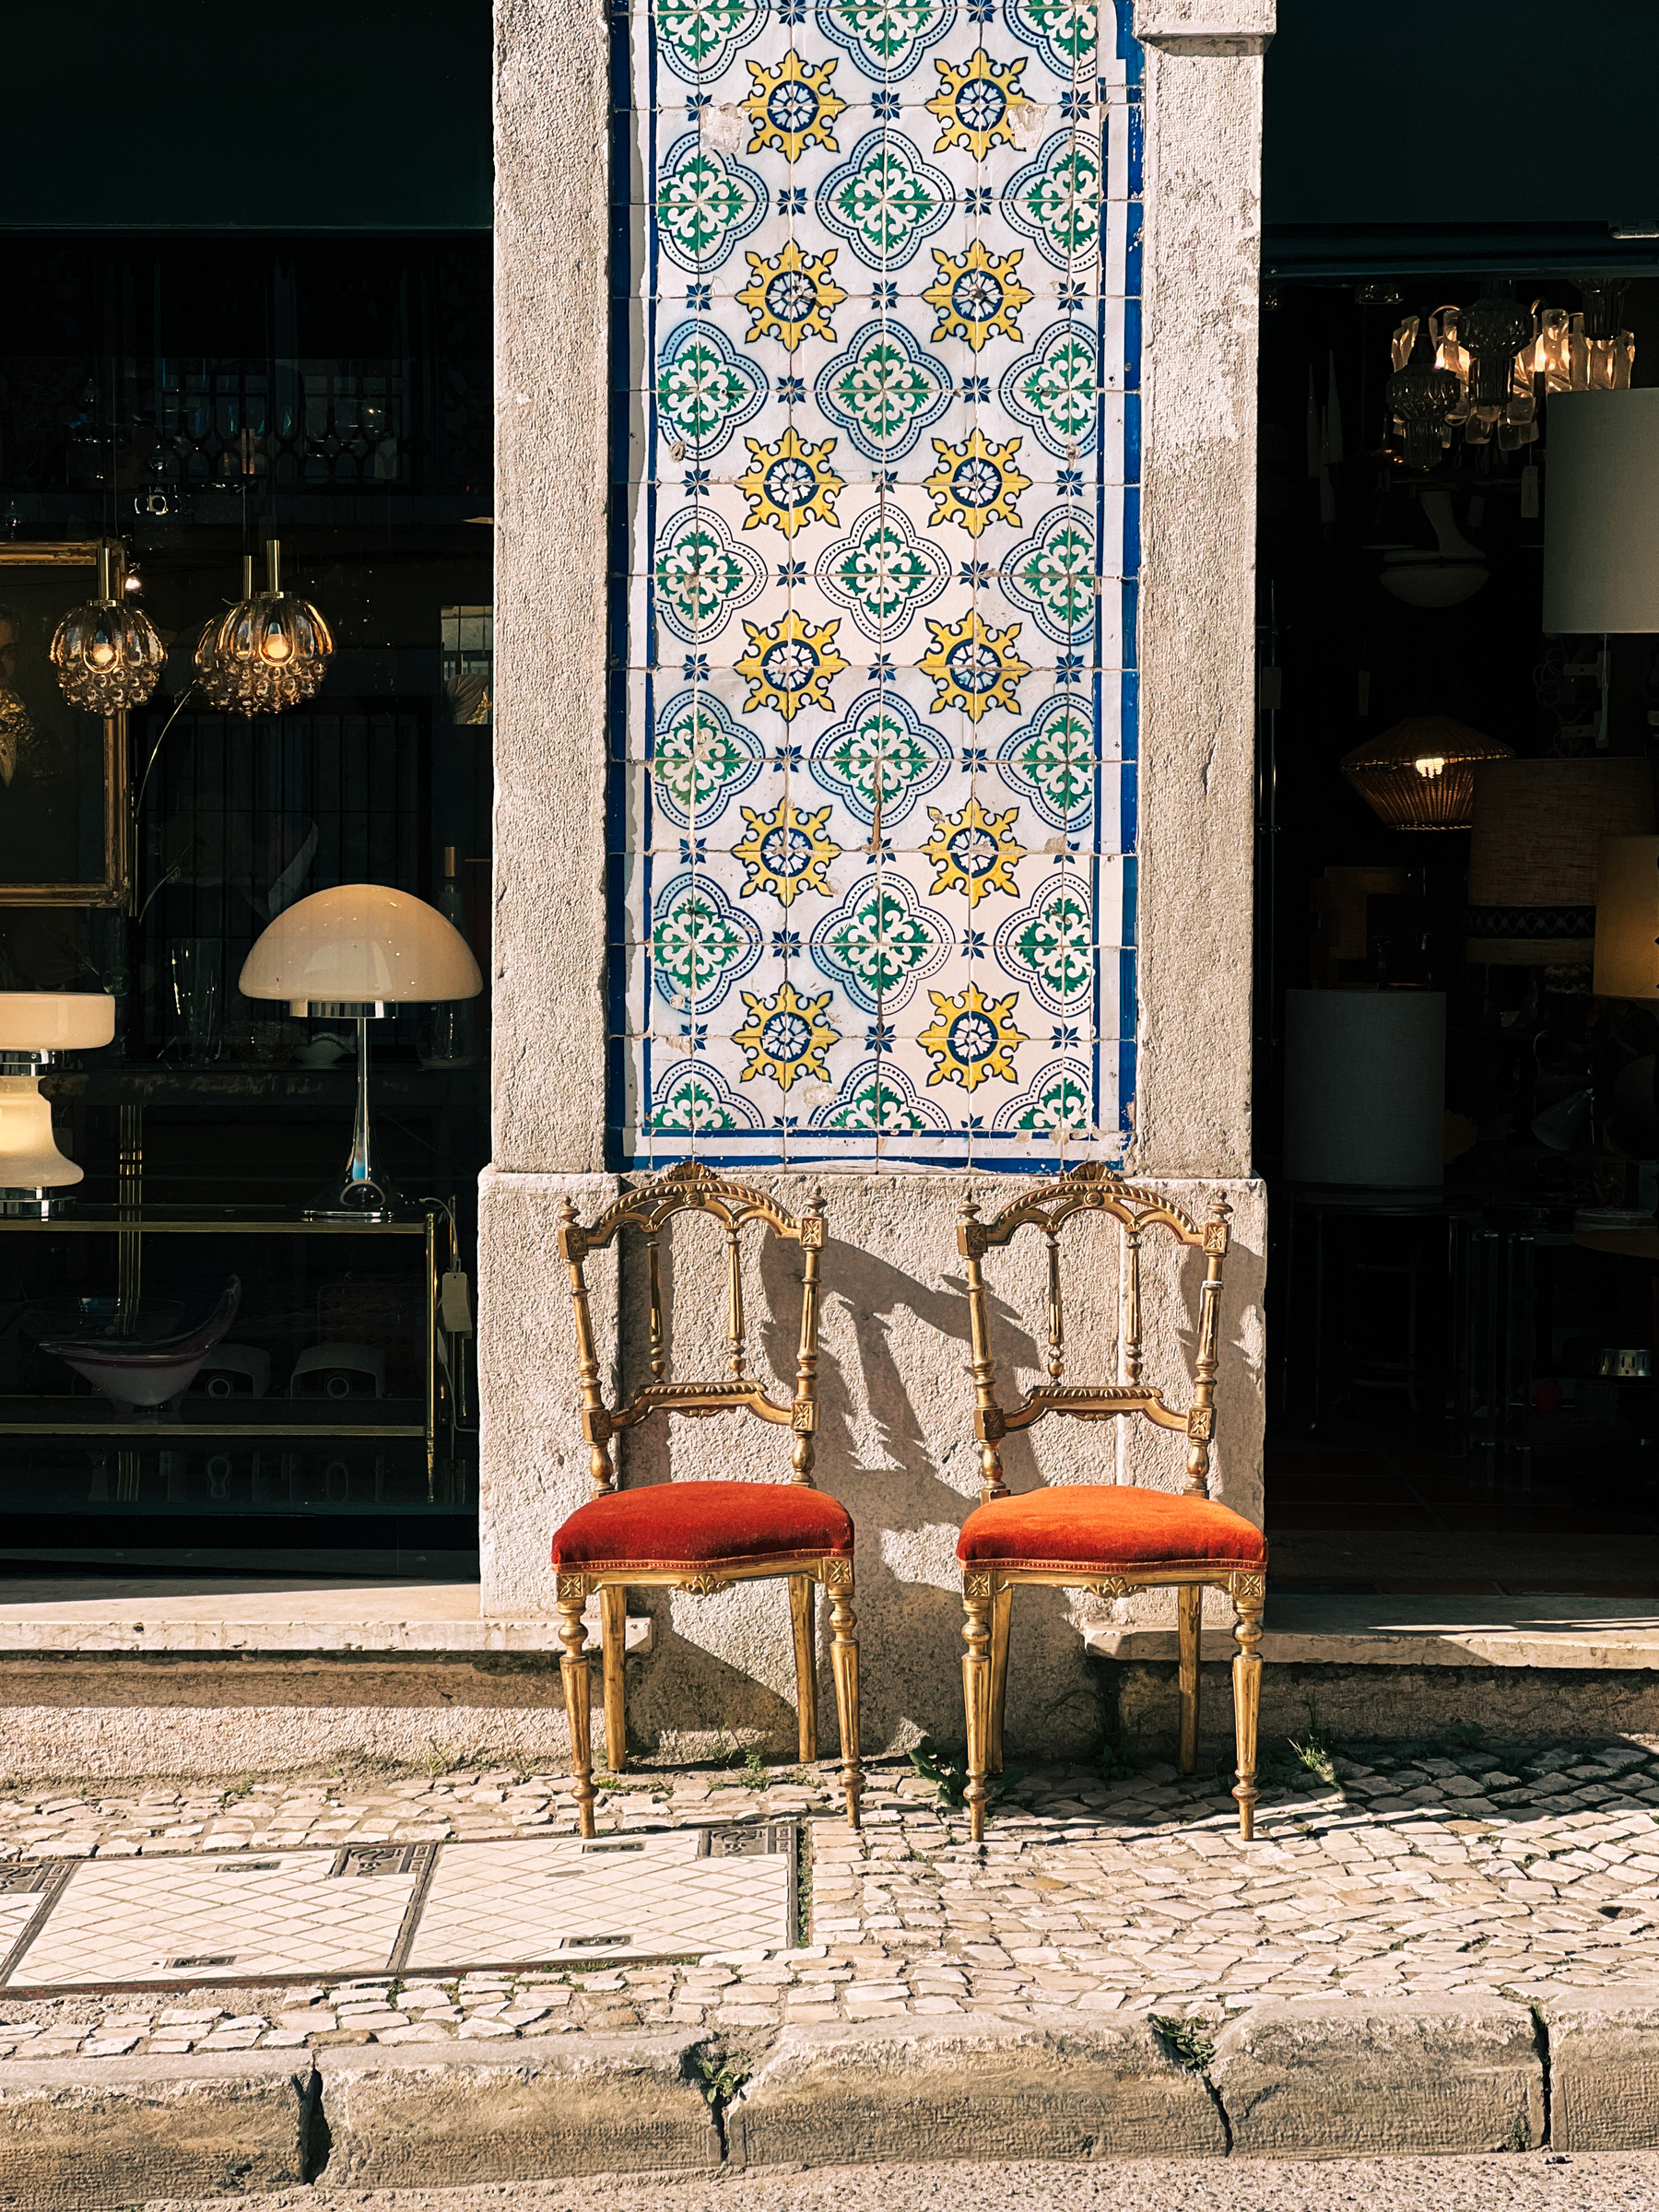 Two vintage red chairs set against a tiled wall featuring a colorful pattern of ceramic tiles, with a glimpse of a stylish interior through a window to the left.